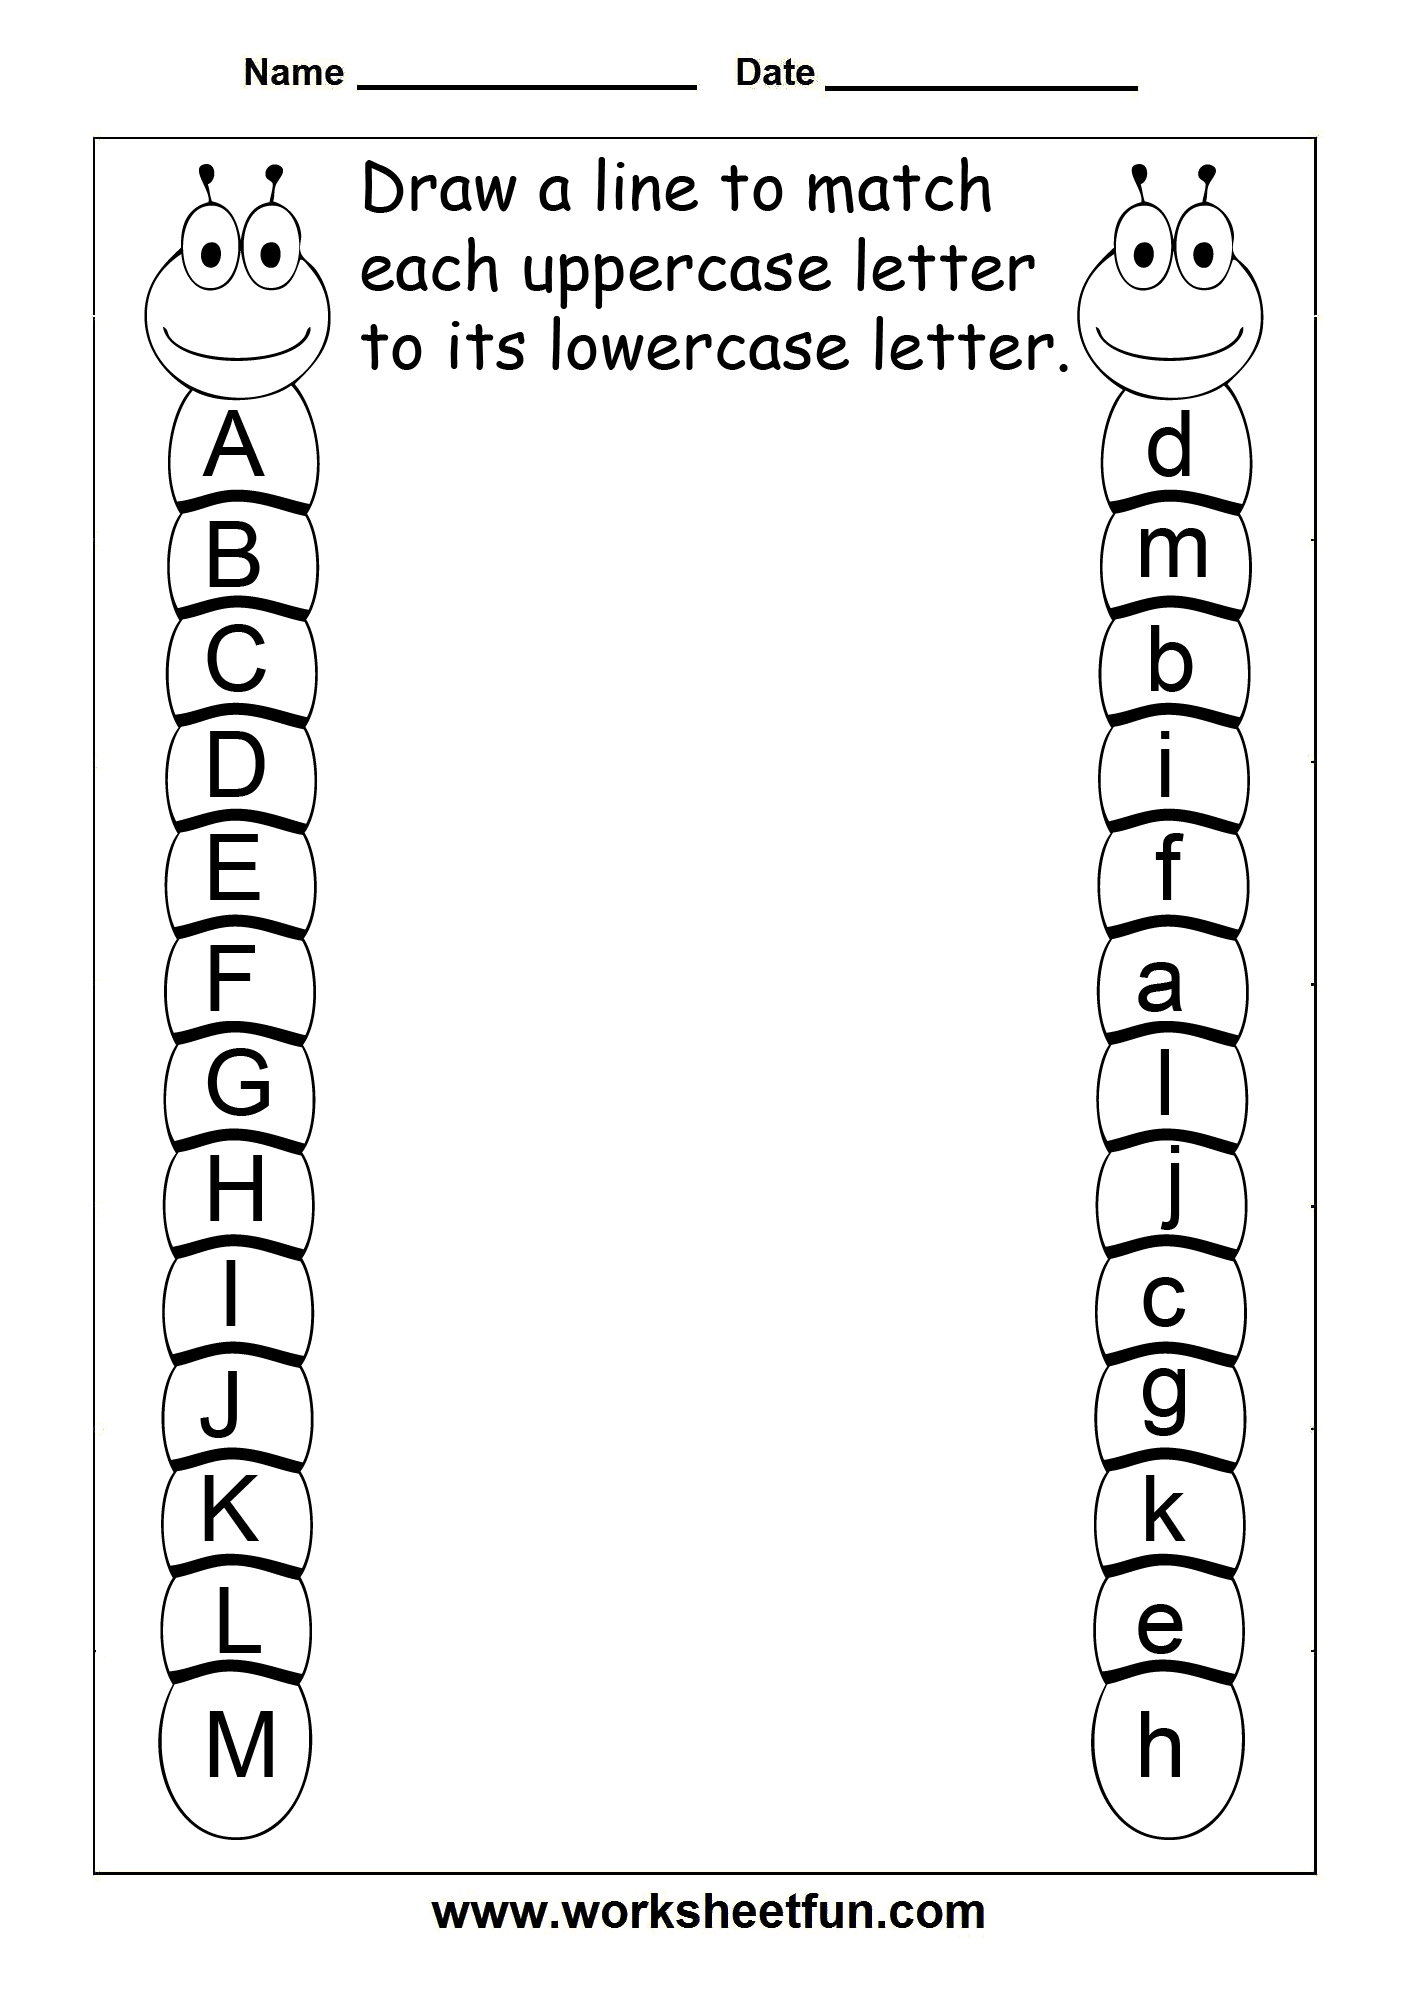 A Website With A Crap Ton Of Awesome School Work Sheets. Rhyas - Free Printable Alphabet Worksheets For Grade 1